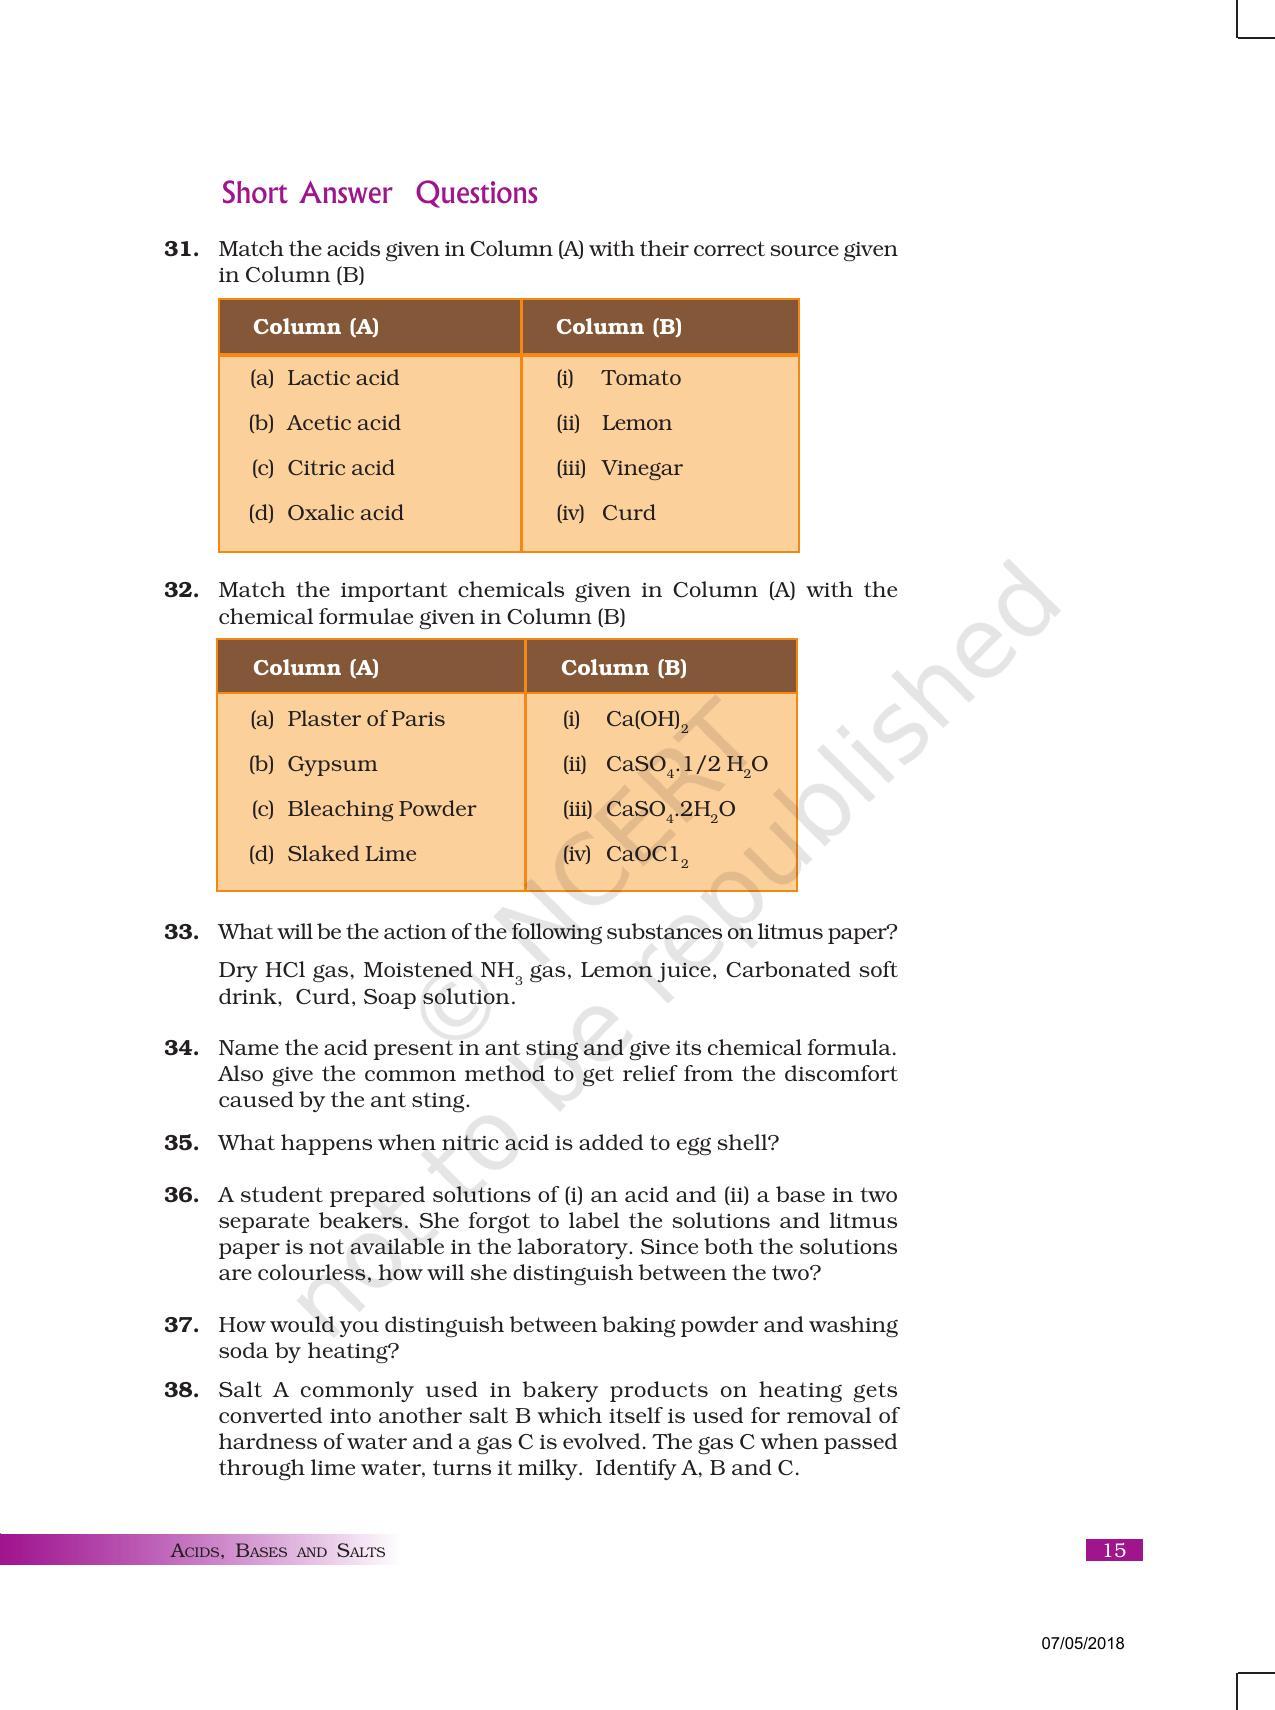 NCERT Exemplar Book for Class 10 Science: Chapter 2 Acids, Bases, and Salts - Page 7